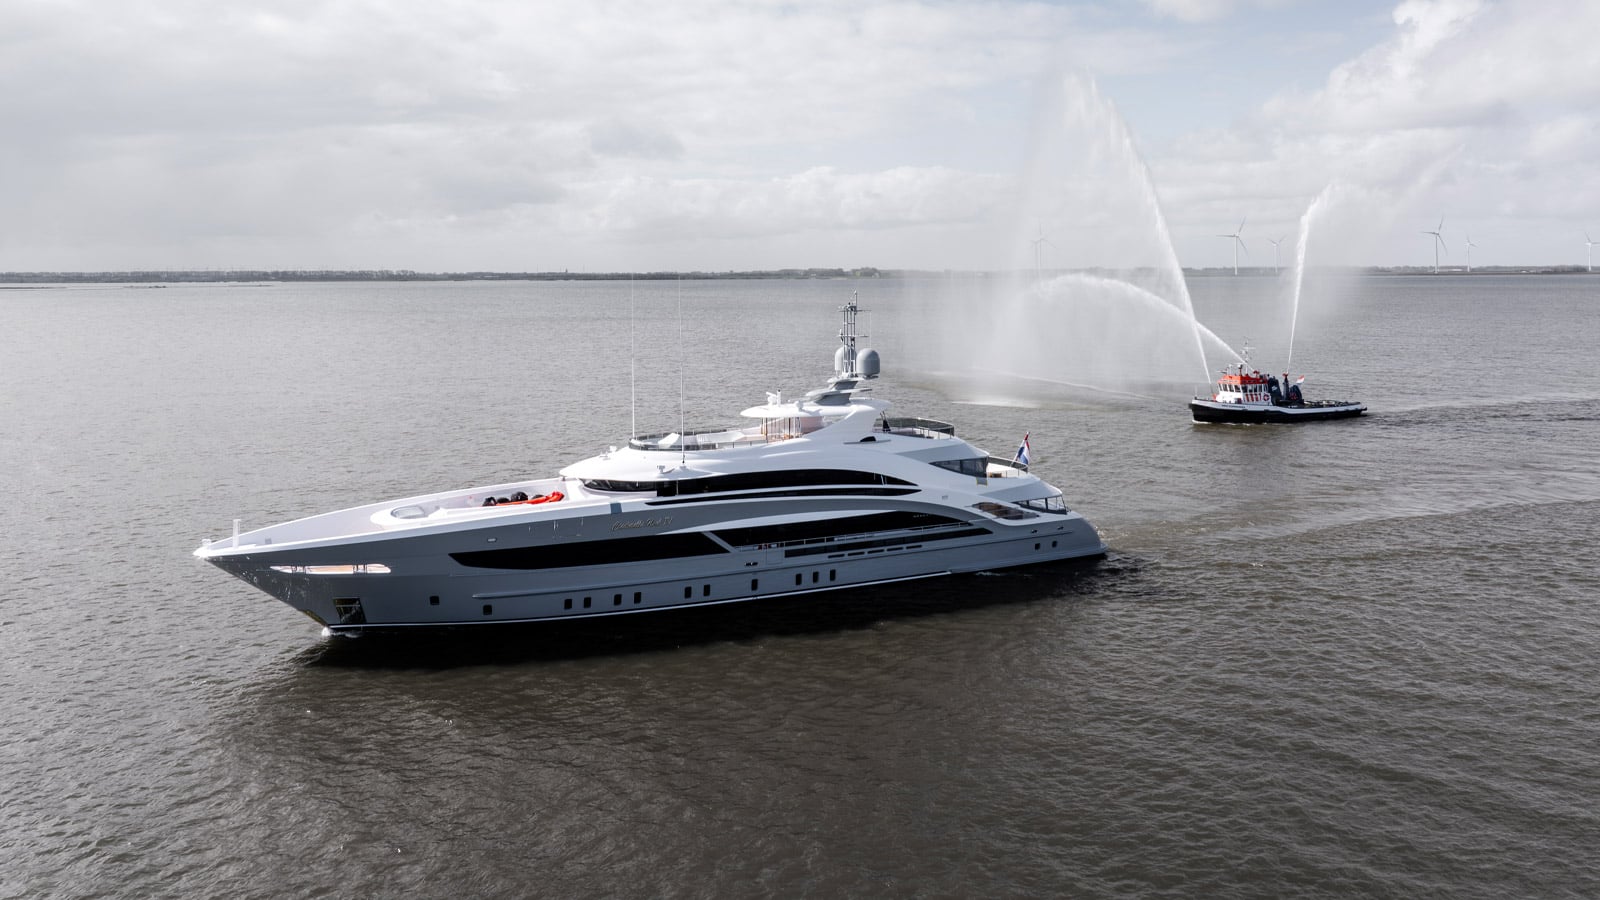 Cinderella Noel IV, the 50-meter yacht designed to take on the North Sea